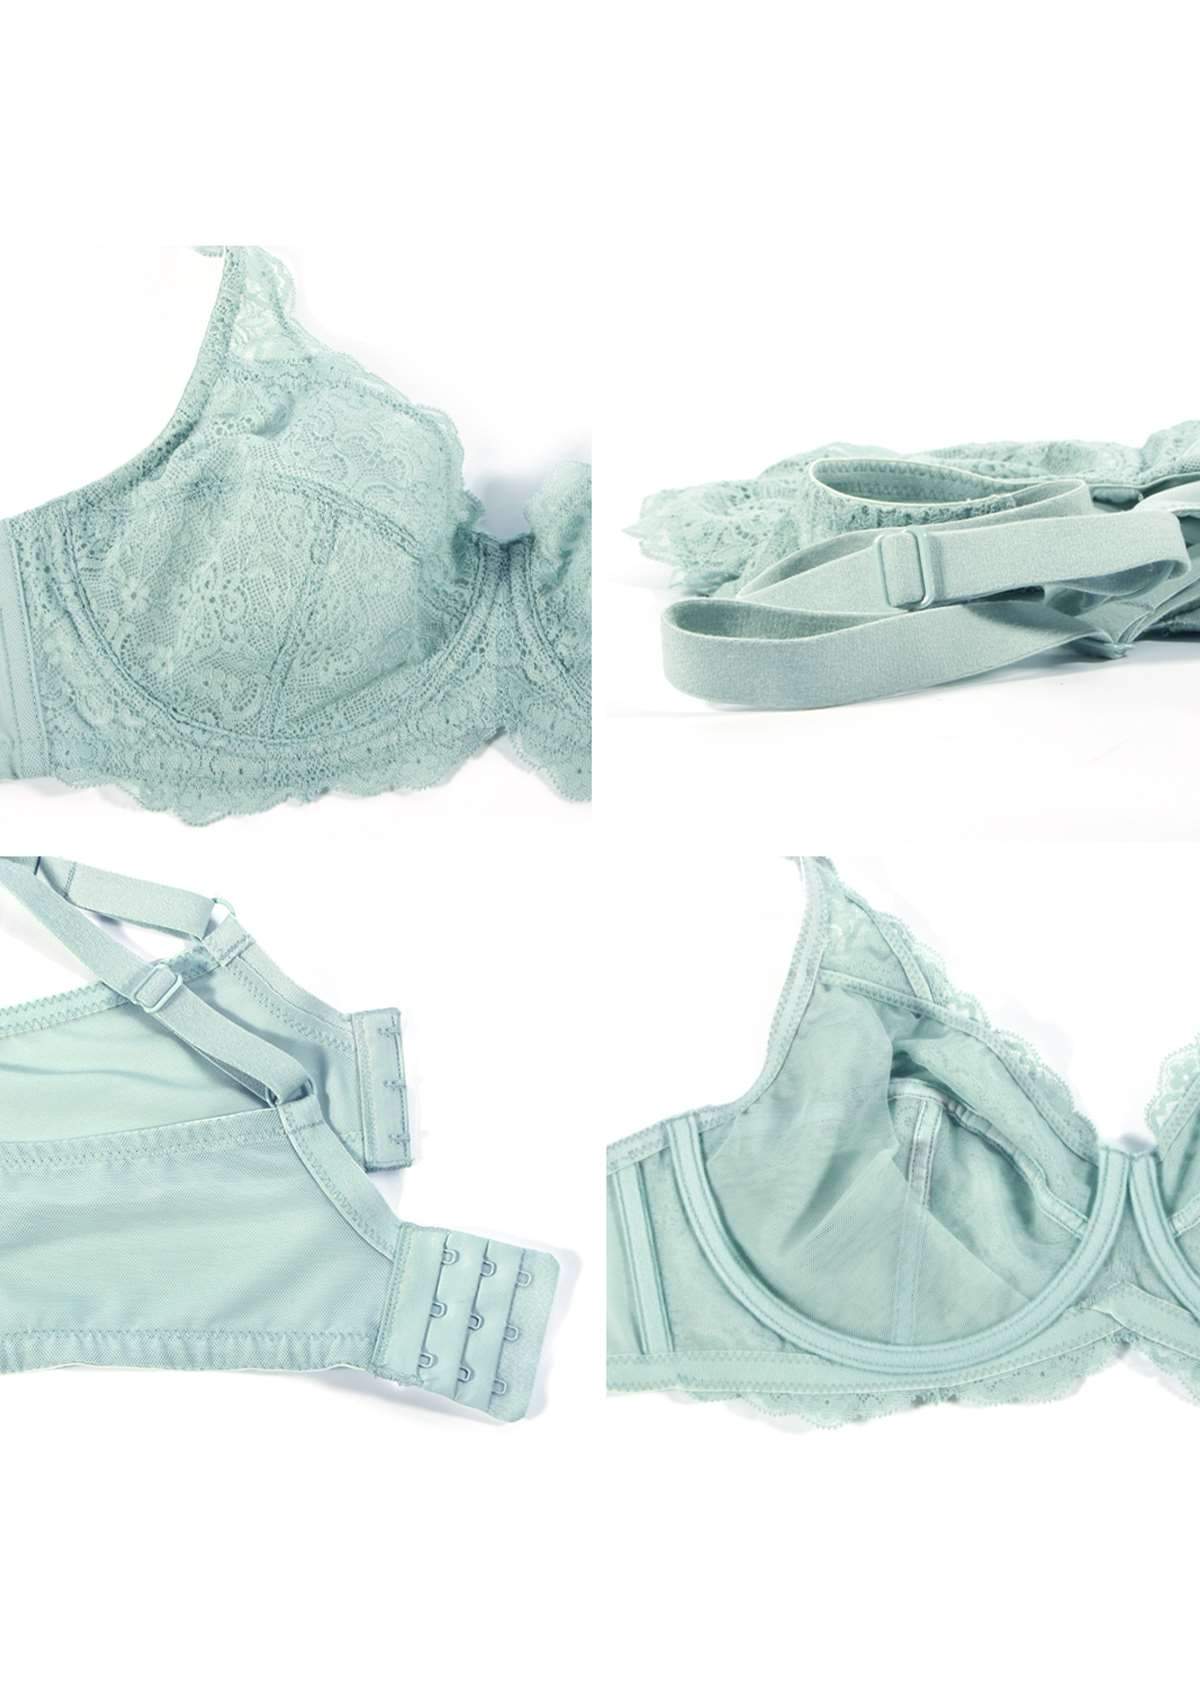 HSIA All-Over Floral Lace: Best Bra For Elderly With Sagging Breasts - Crystal Blue / 34 / D